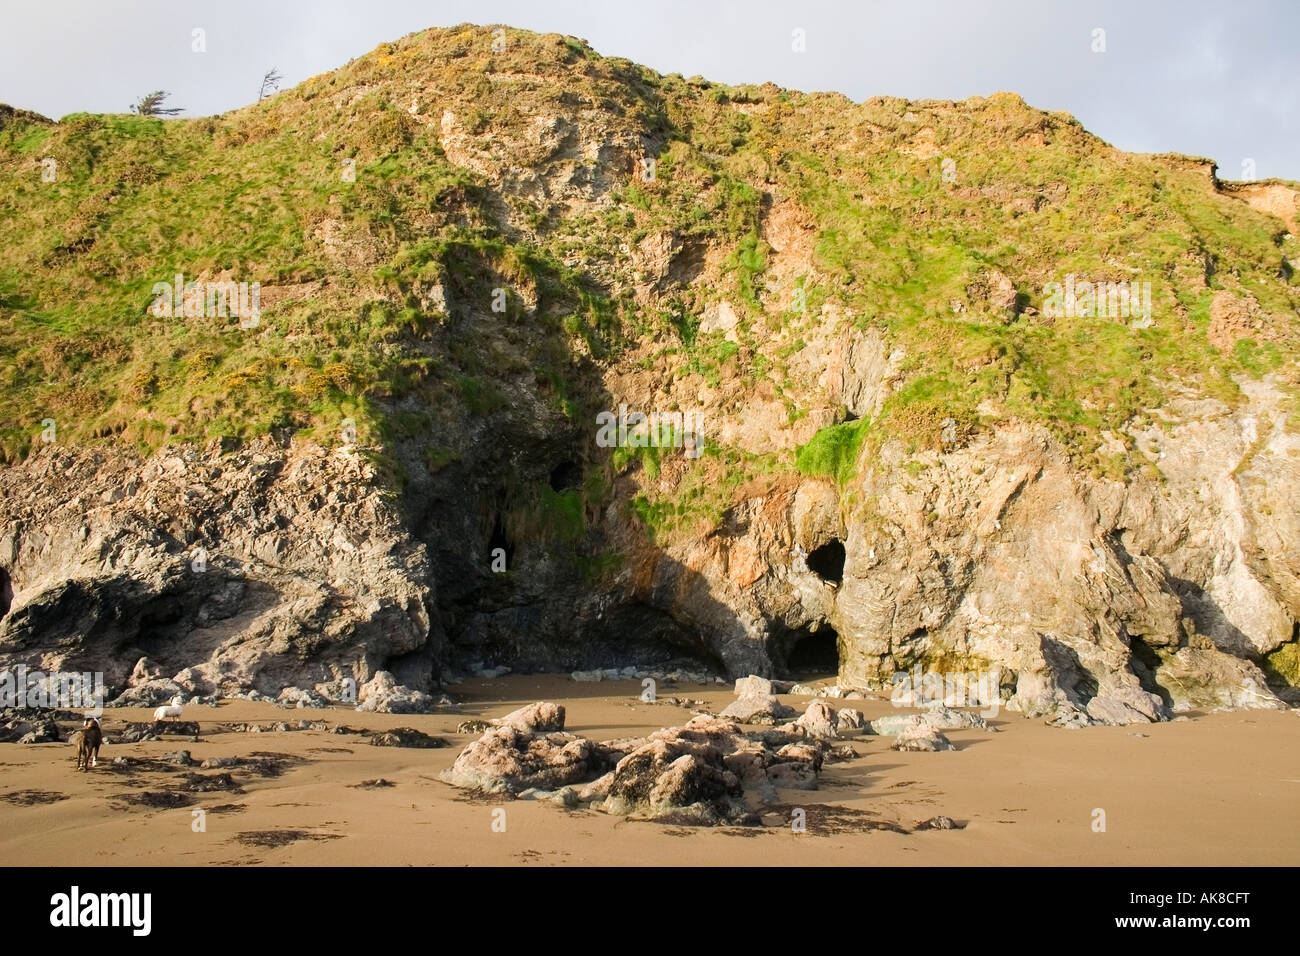 Exploratory Mining Galleries in Rocks, Lady's Cove, Copper Coast, Co Waterford, Ireland Stock Photo